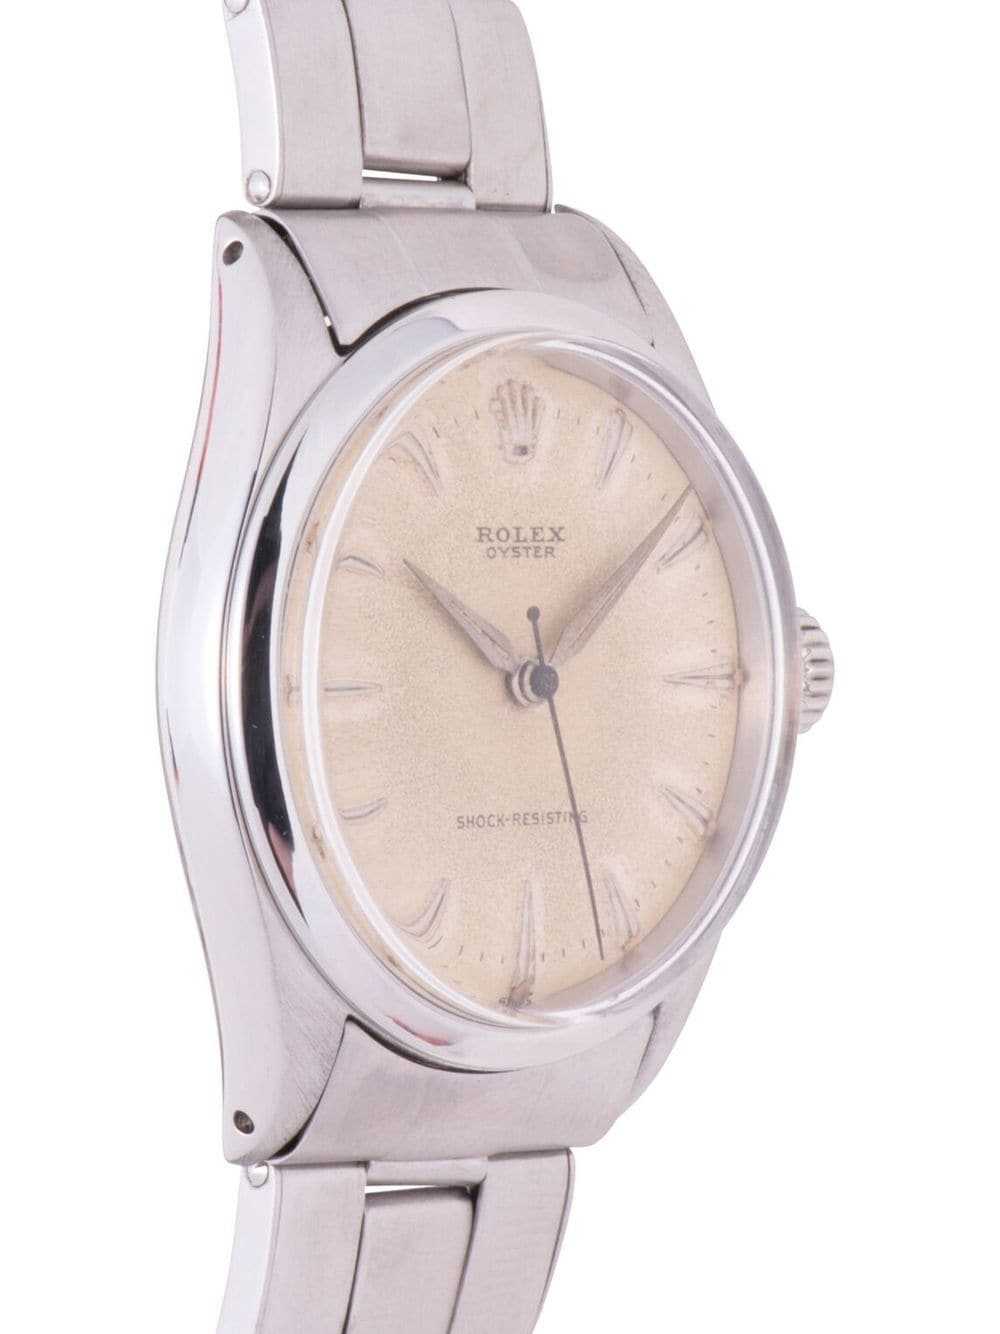 Rolex pre-owned Oyster Perpetual 34mm - White - image 4